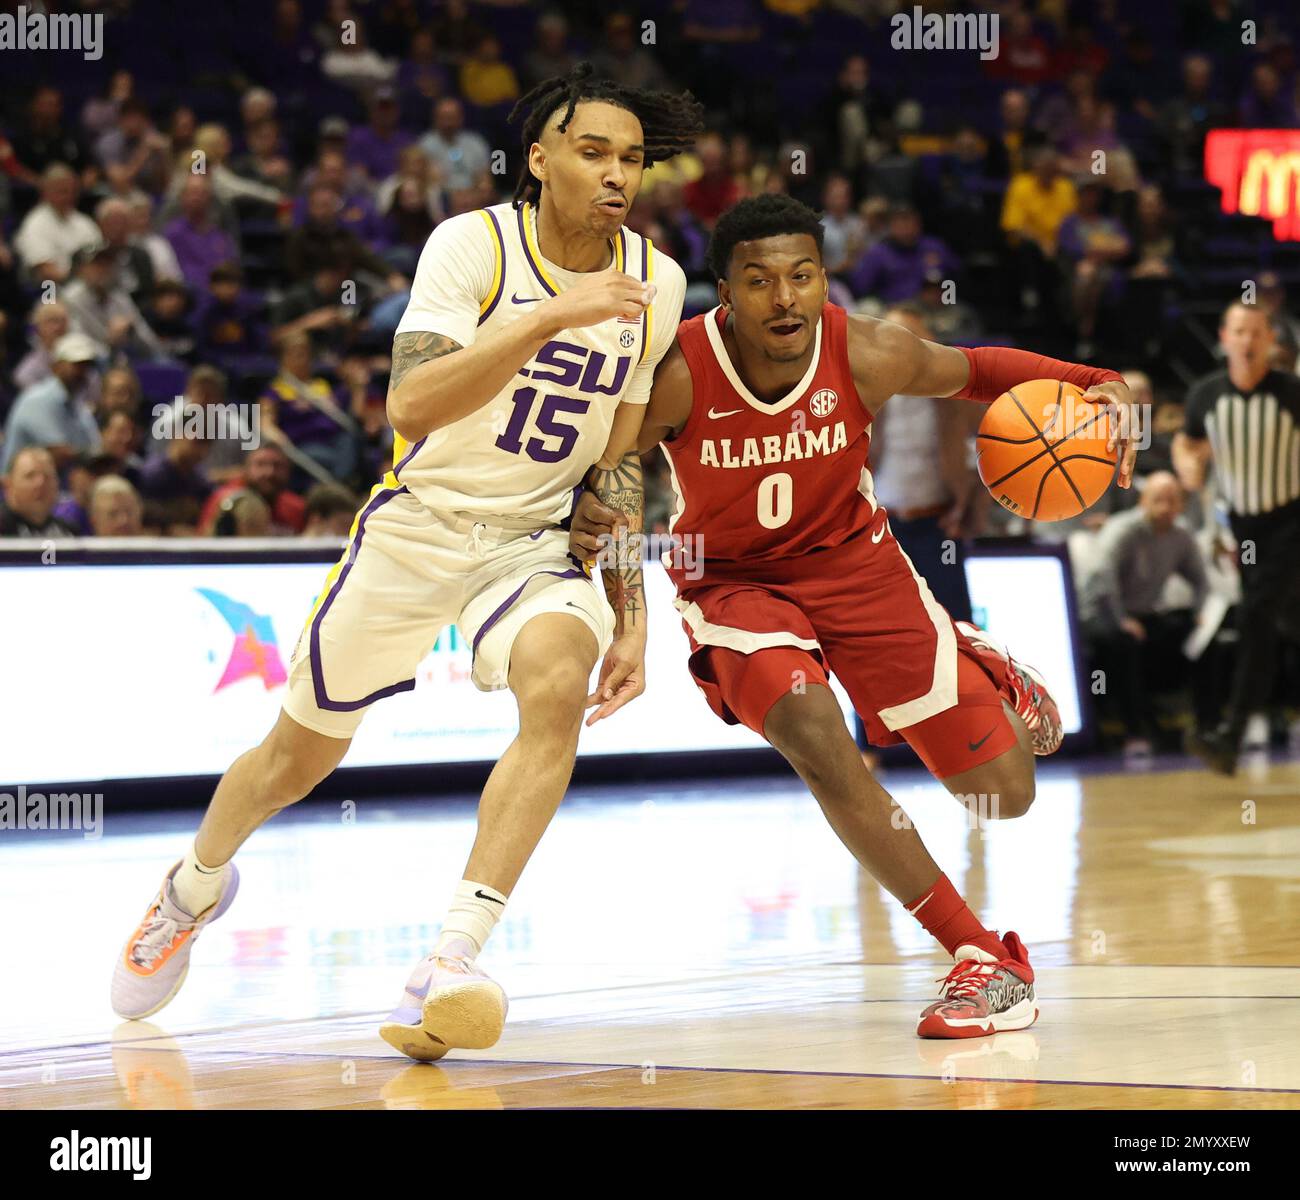 Baton Rouge, USA. 04th Feb, 2023. Alabama Crimson Tide guard Jayden Bradley (0) tries to get past LSU Tigers forward Tyrell Ward (15) during a men's college basketball game at the Pete Maravich Assembly Center in Baton Rouge, Louisiana on Saturday, February 4, 2023. (Photo by Peter G. Forest/Sipa USA) Credit: Sipa USA/Alamy Live News Stock Photo